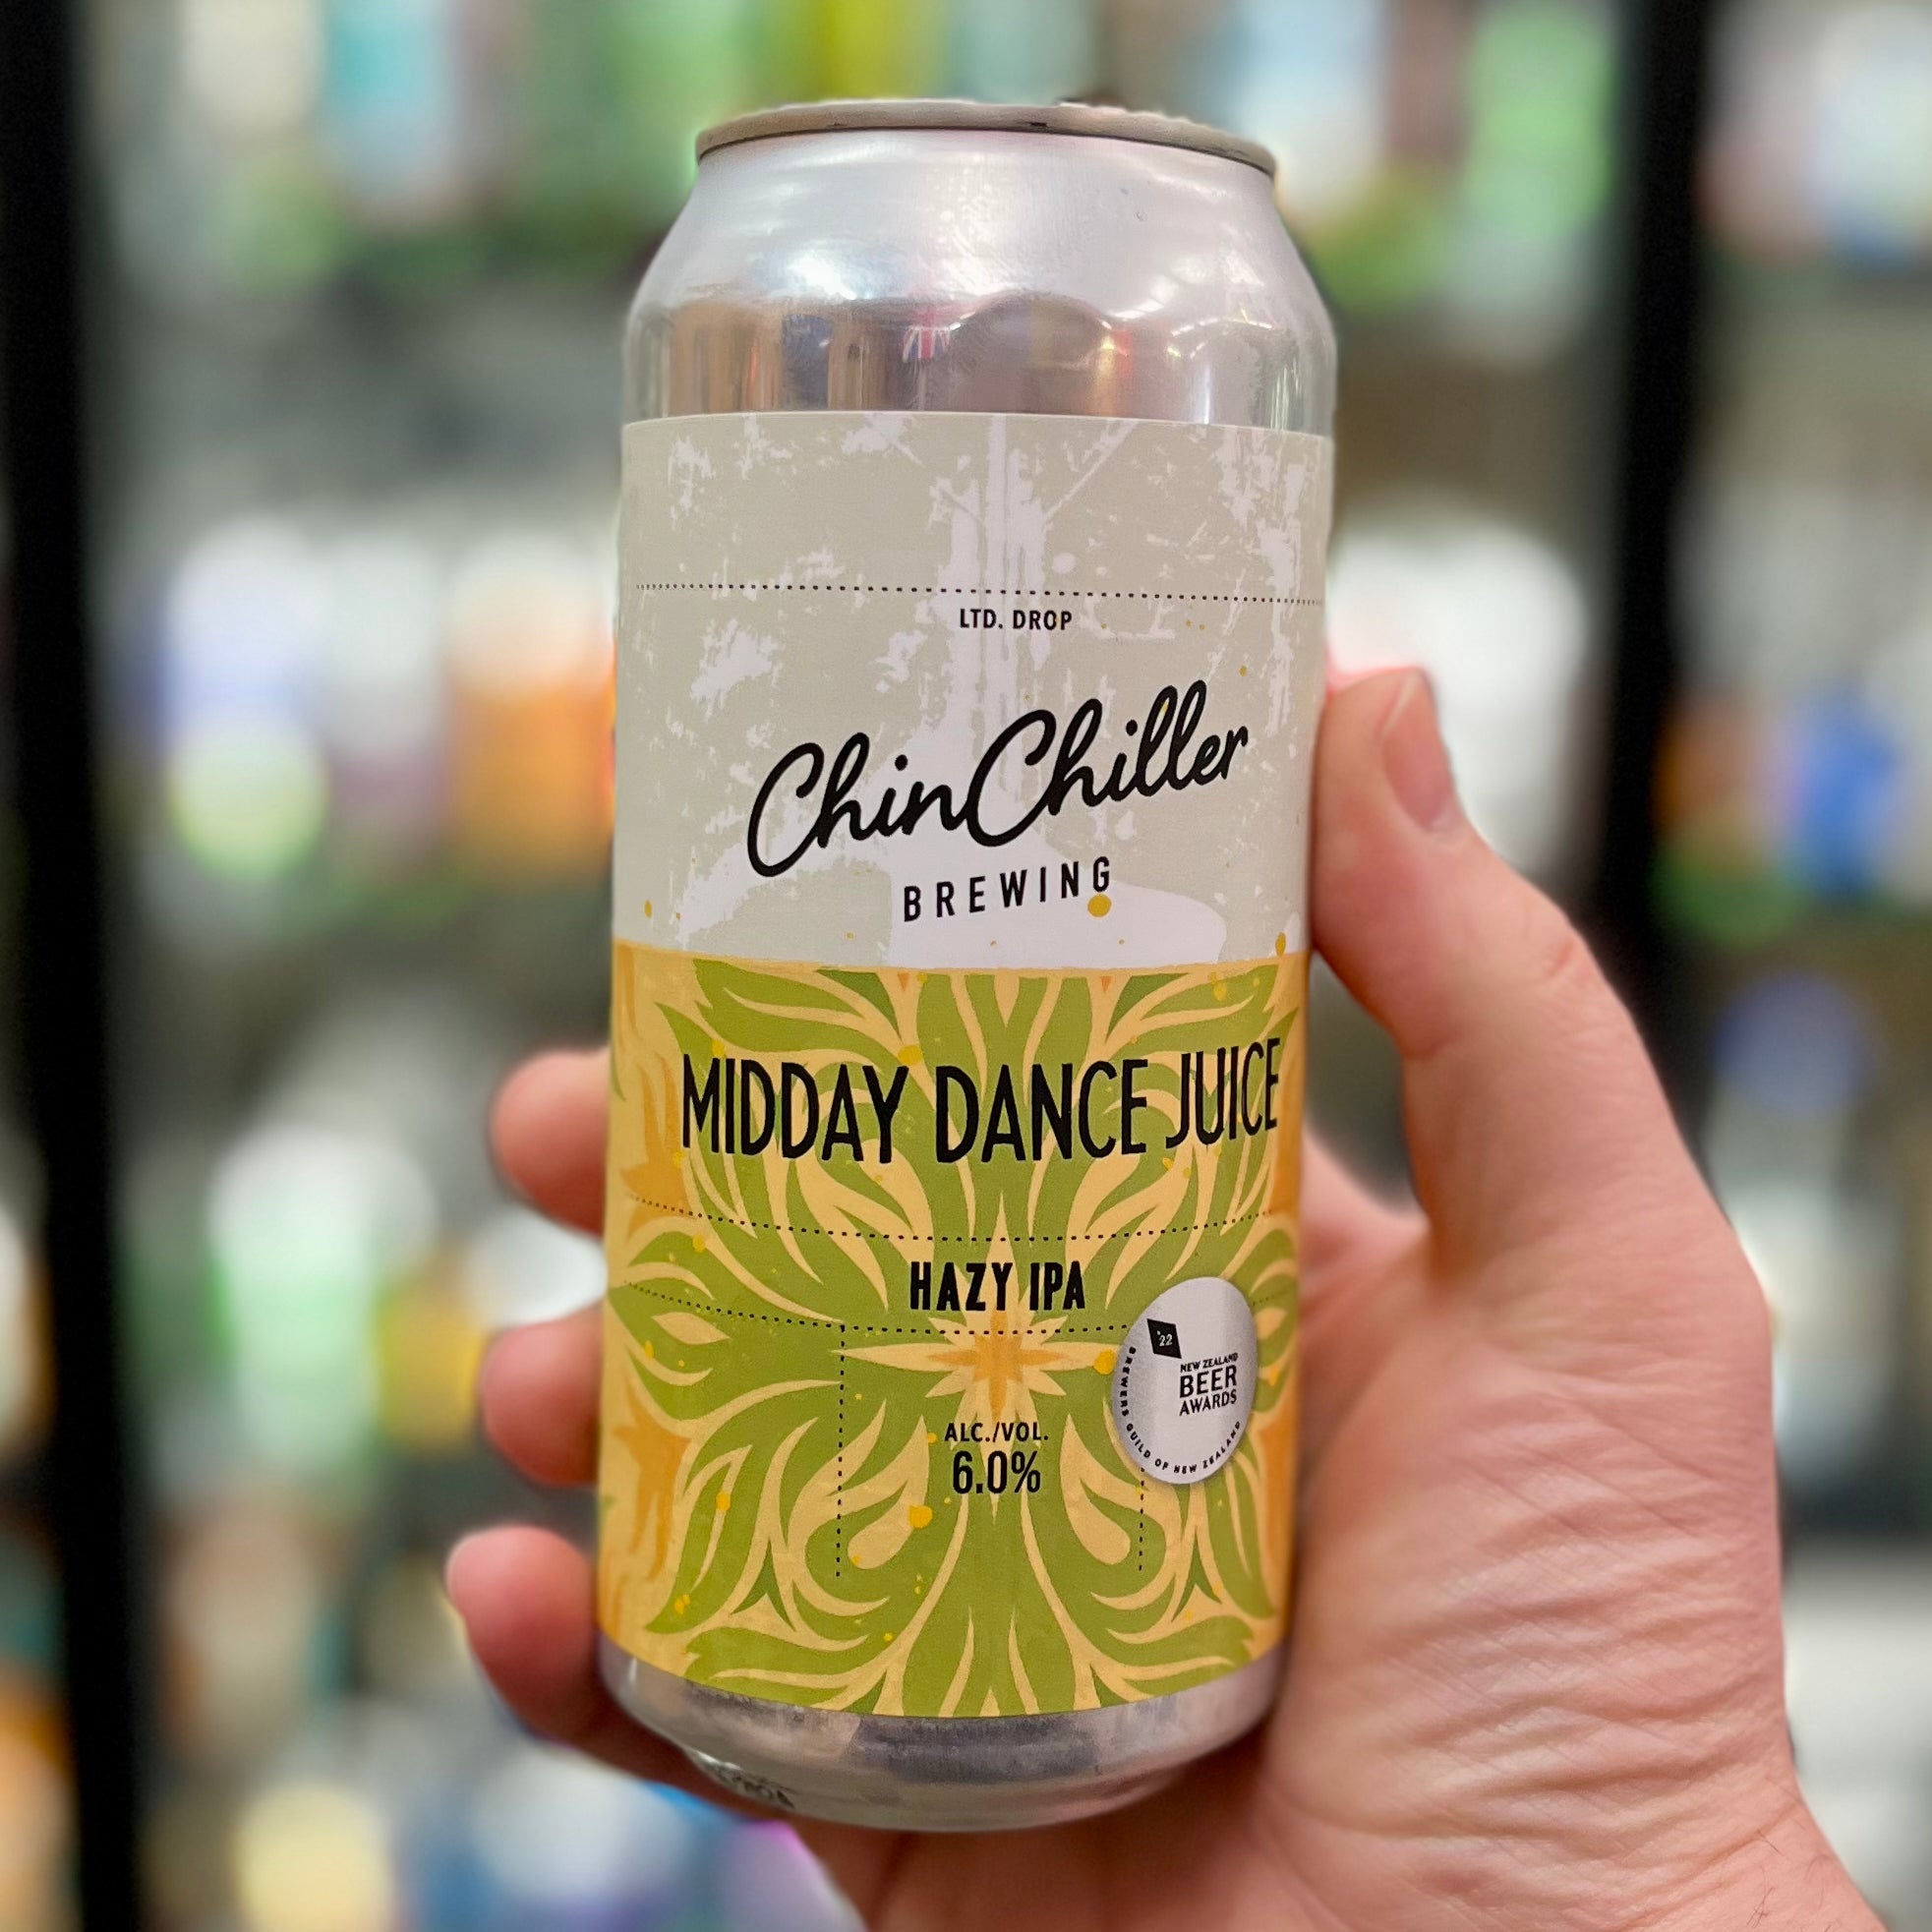 ChinChiller Brewing Midday Dance Juice Hazy IPA Hazy IPA - The Beer Library